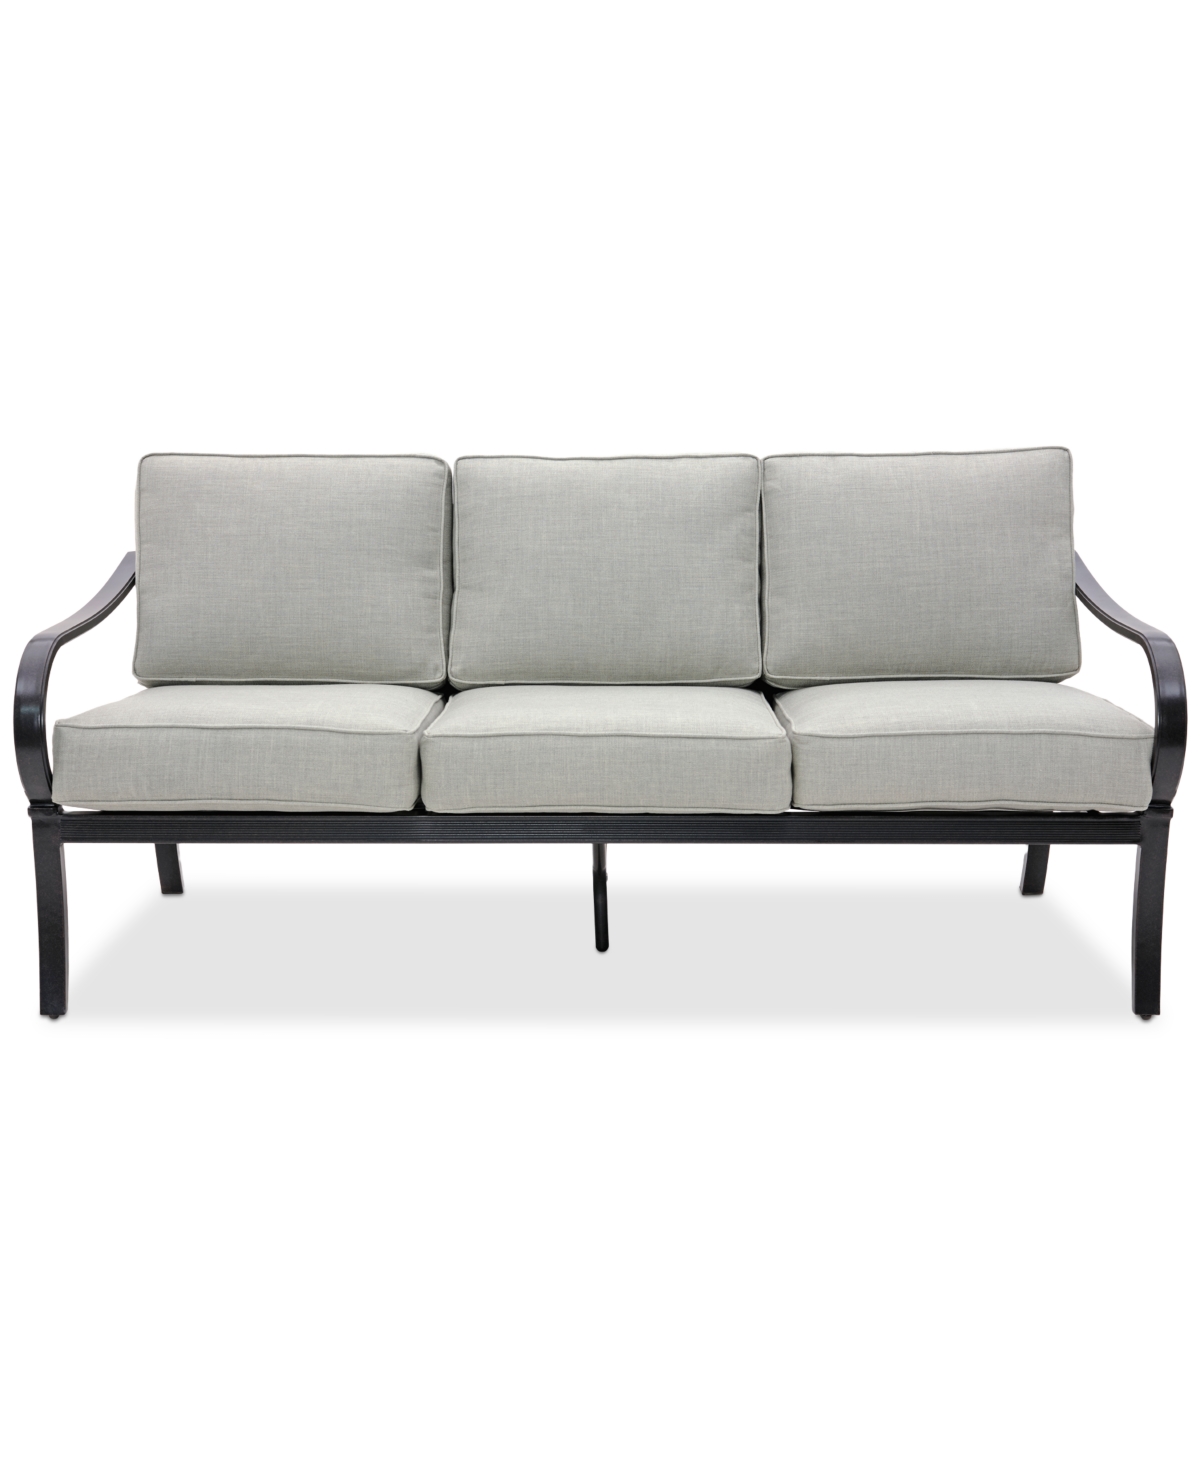 Shop Agio St Croix Outdoor Sofa In Oyster Light Grey